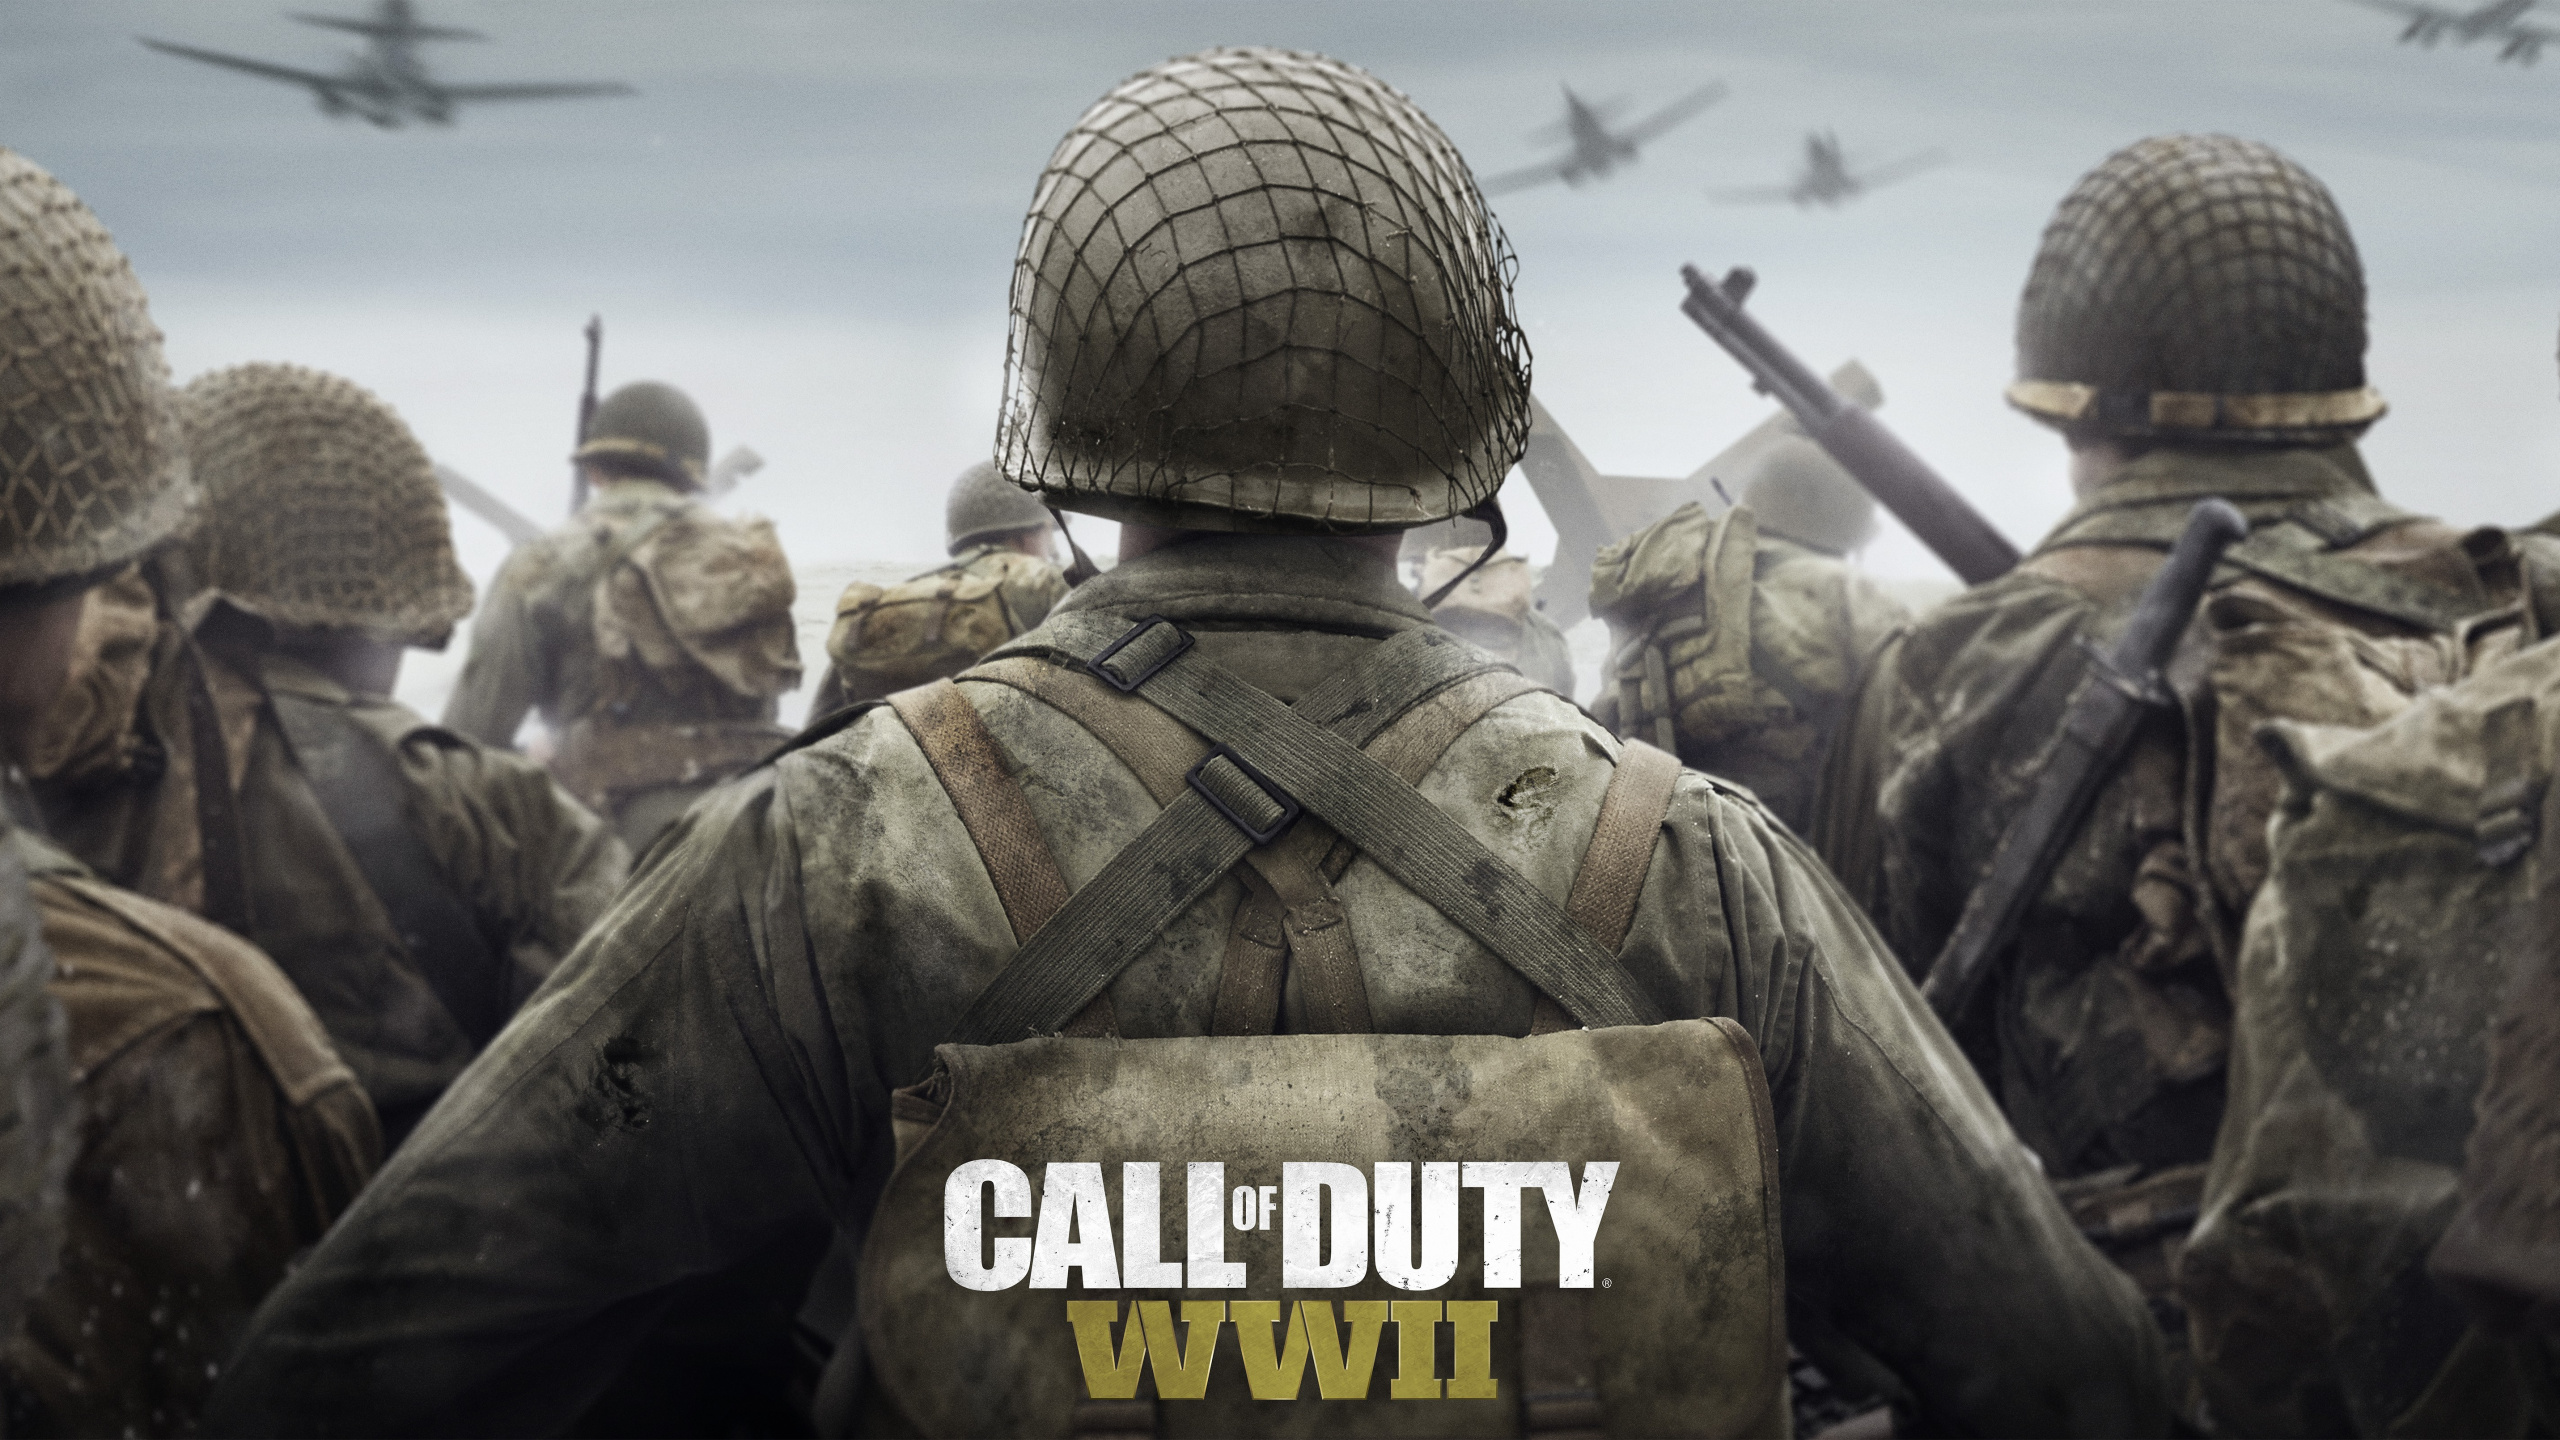 Call of Duty Ww2, Call of Duty WWII, Activision, Sledgehammer Games, Soldat. Wallpaper in 2560x1440 Resolution